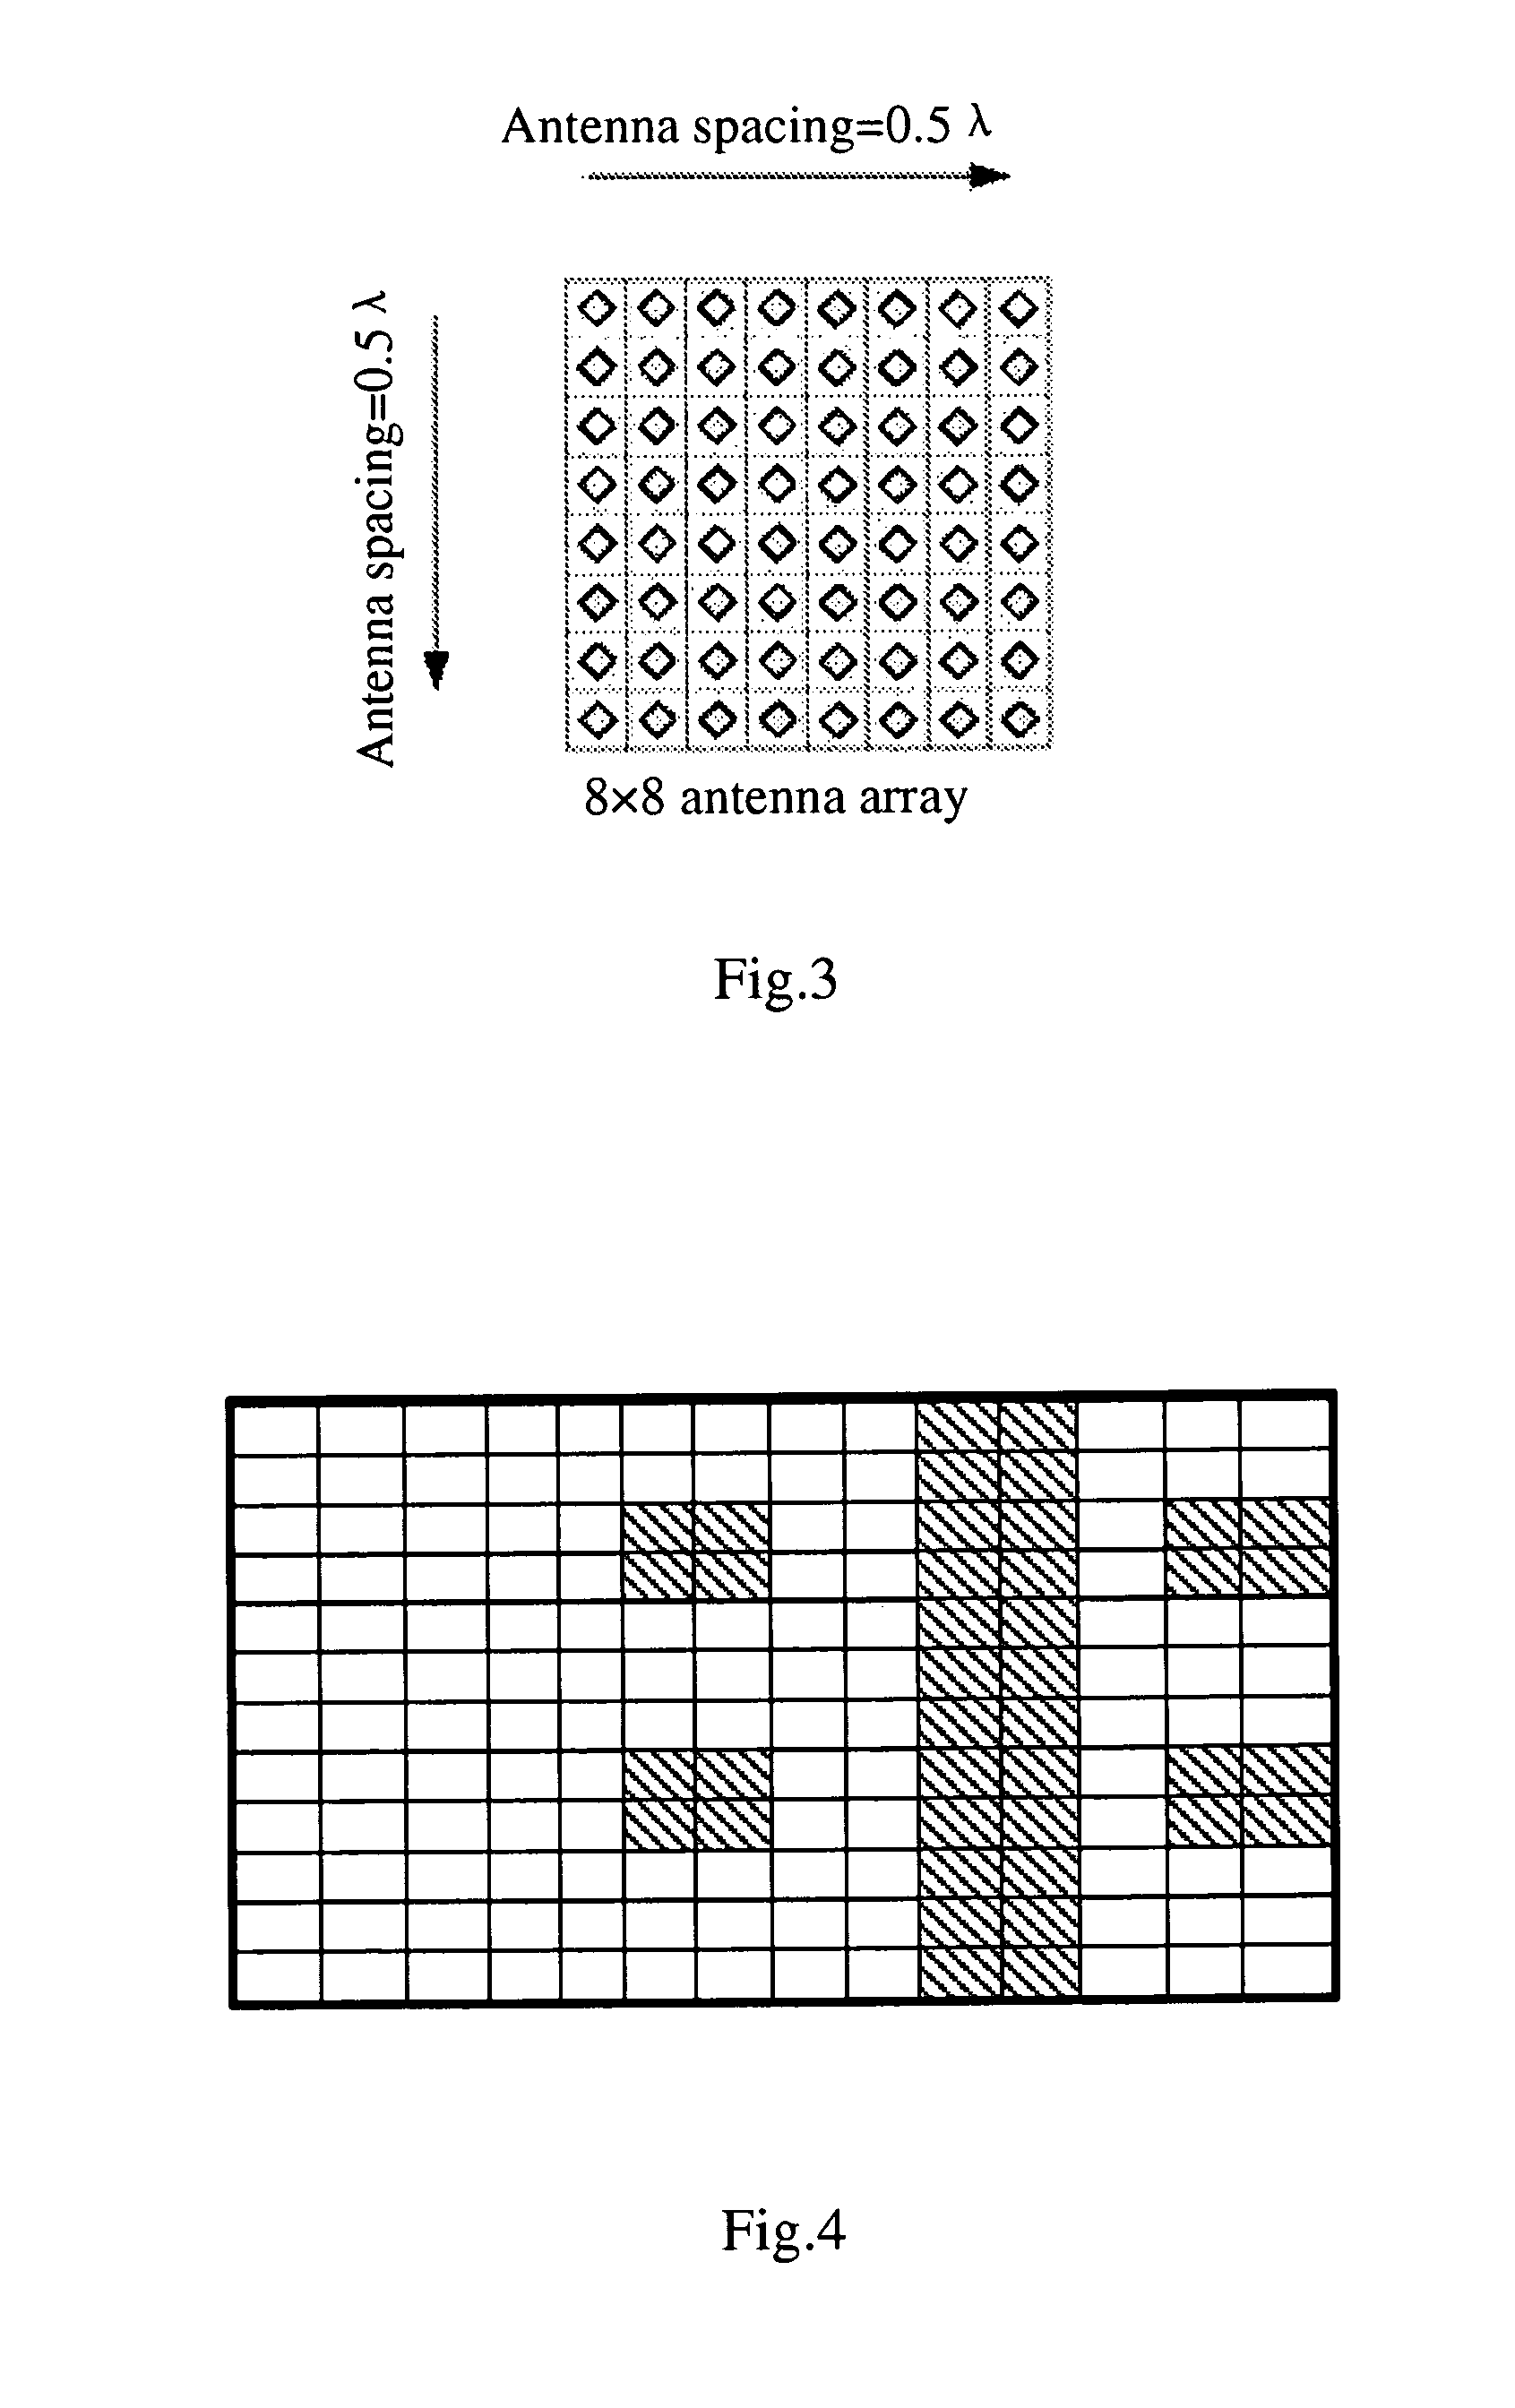 Method of mapping csi-rs ports to antenna units, base station and user equipment